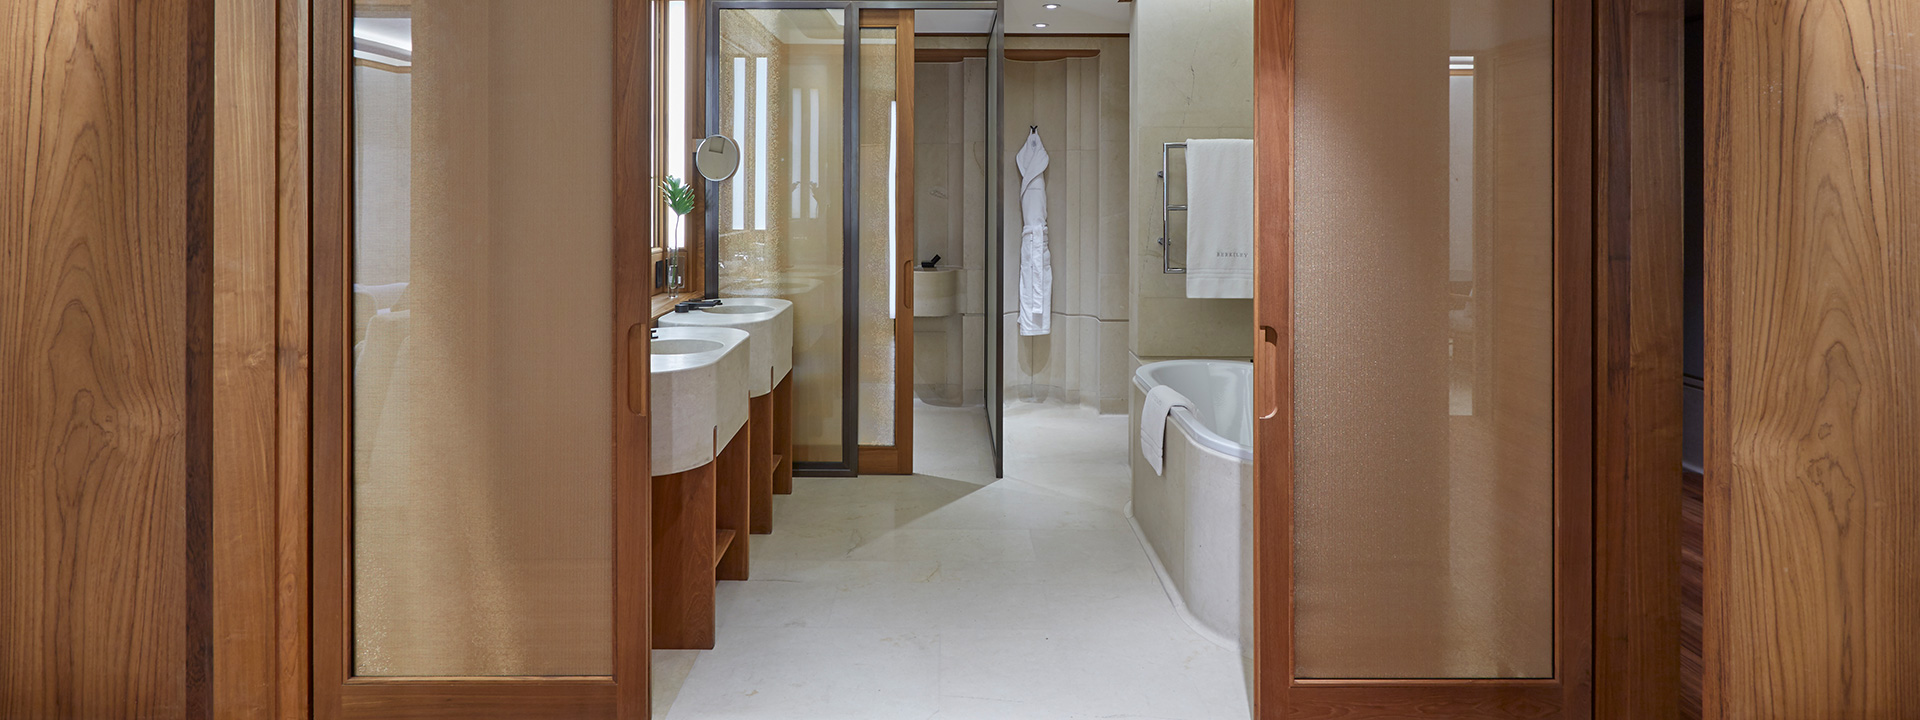 Contemporary bathroom with freestanding bathtub and walk-in shower in the Knightsbridge Suite.